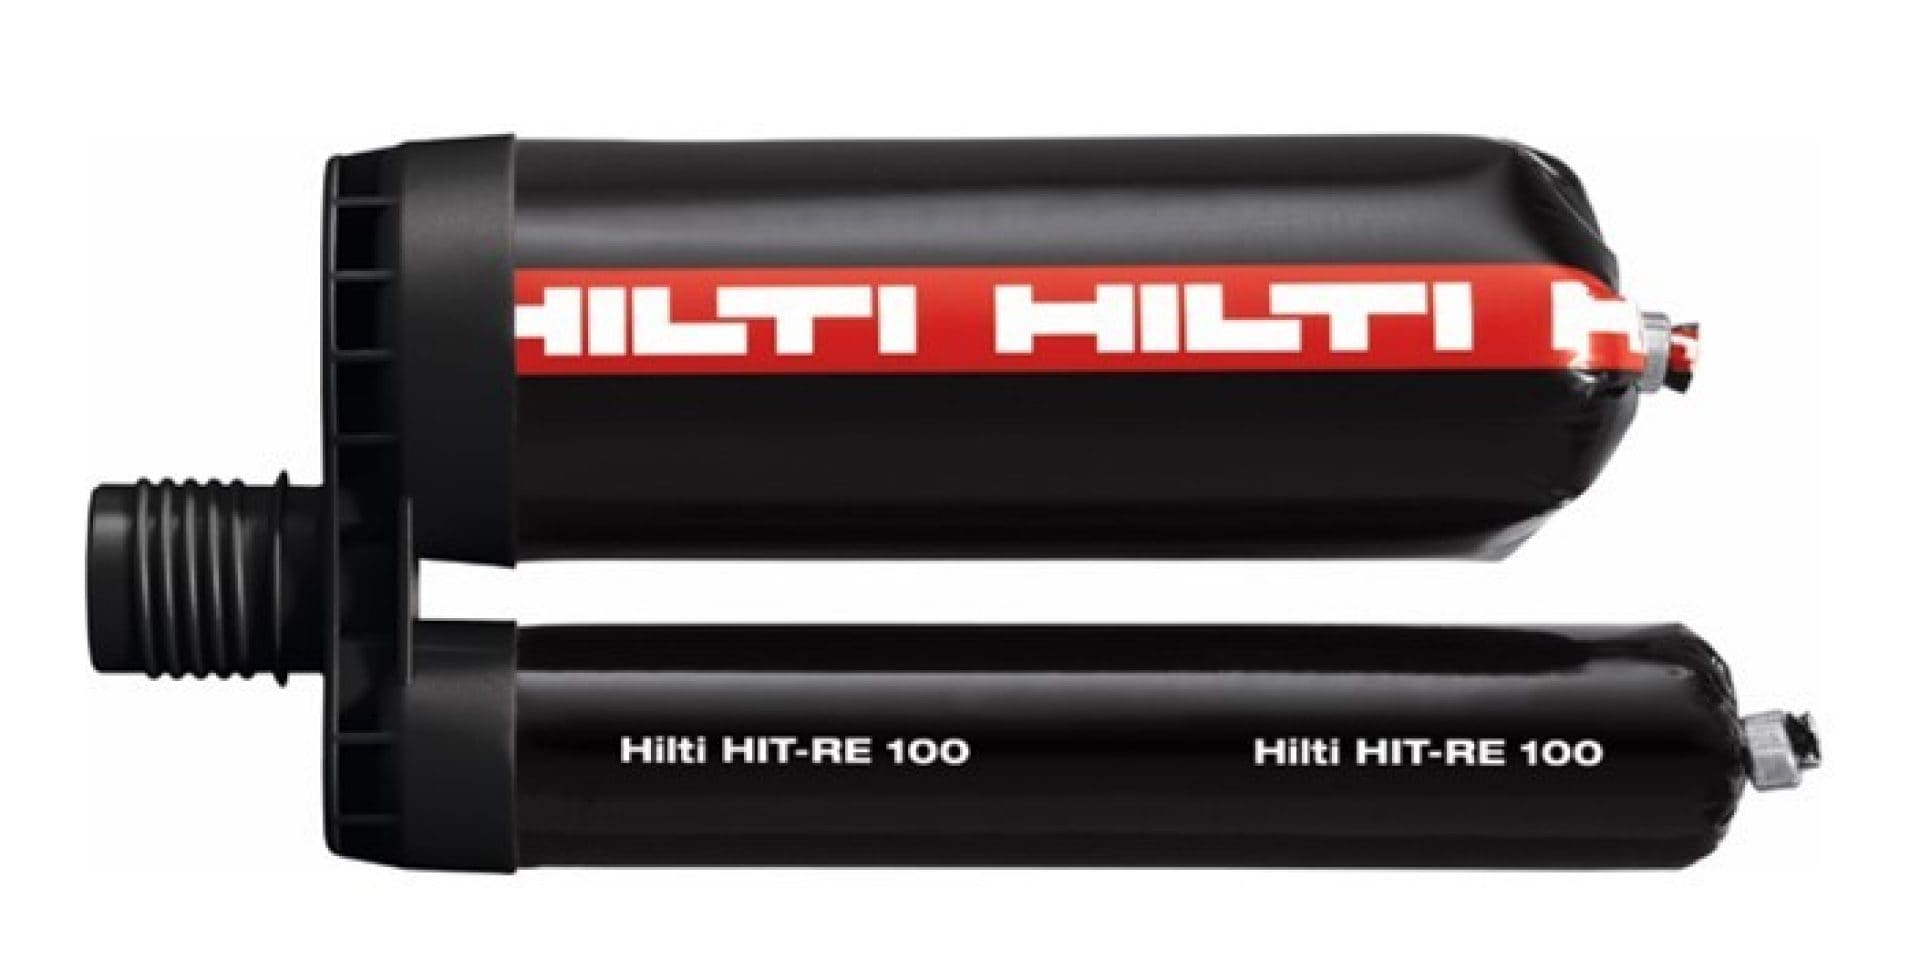 Hilti injectable mortar HIT-RE 100